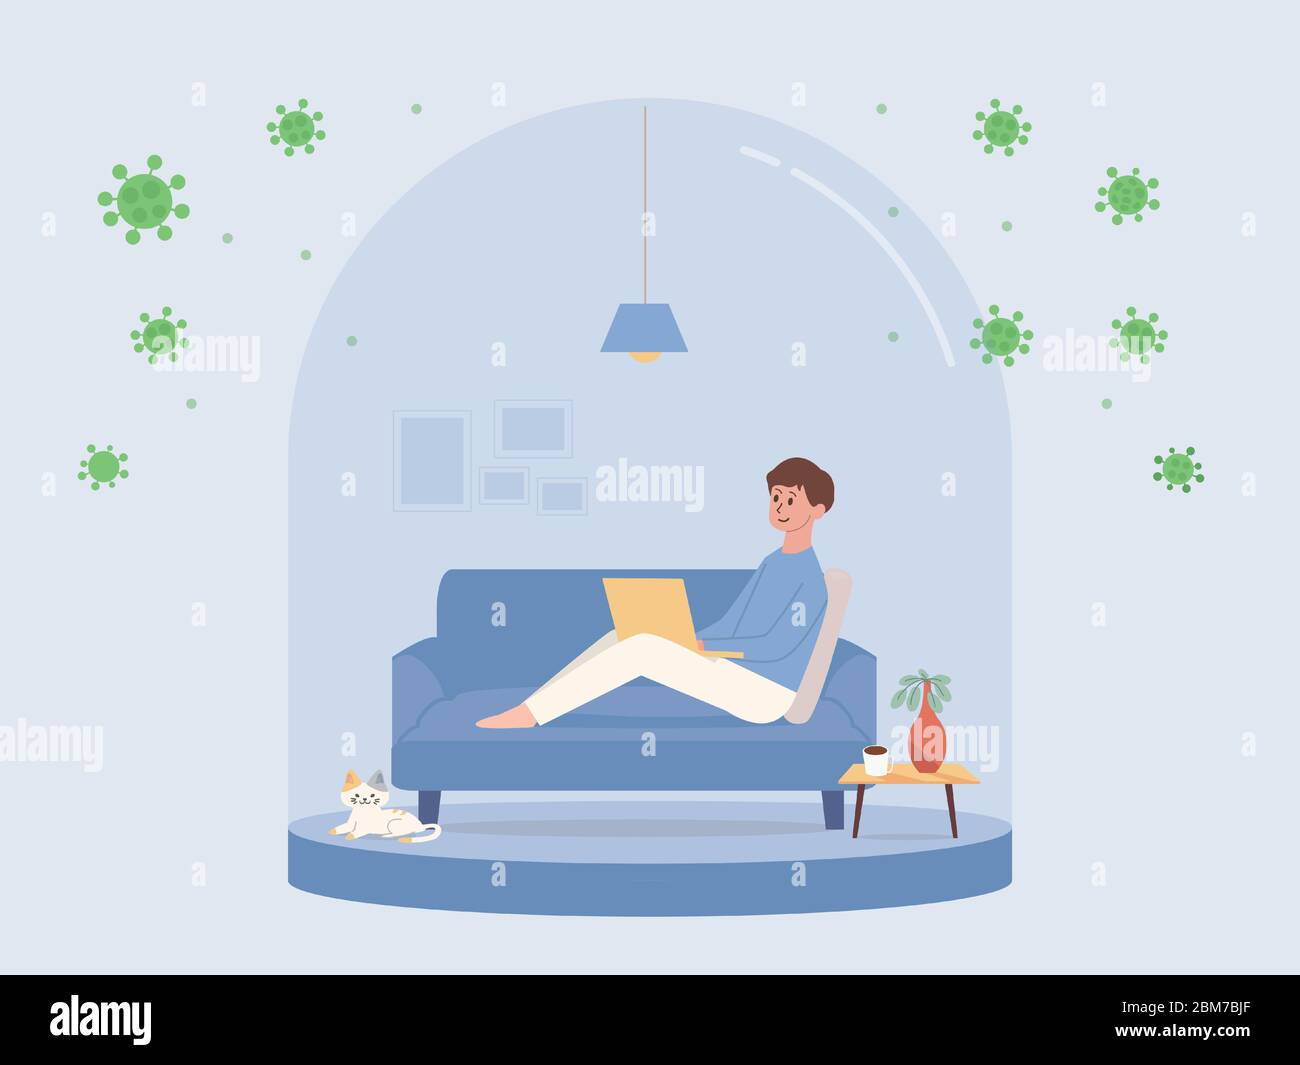 Man sitting on sofa and working with computer in small glass room like a snow ball. Concept Illustration about Stay at Home for protect virus. Stock Vector